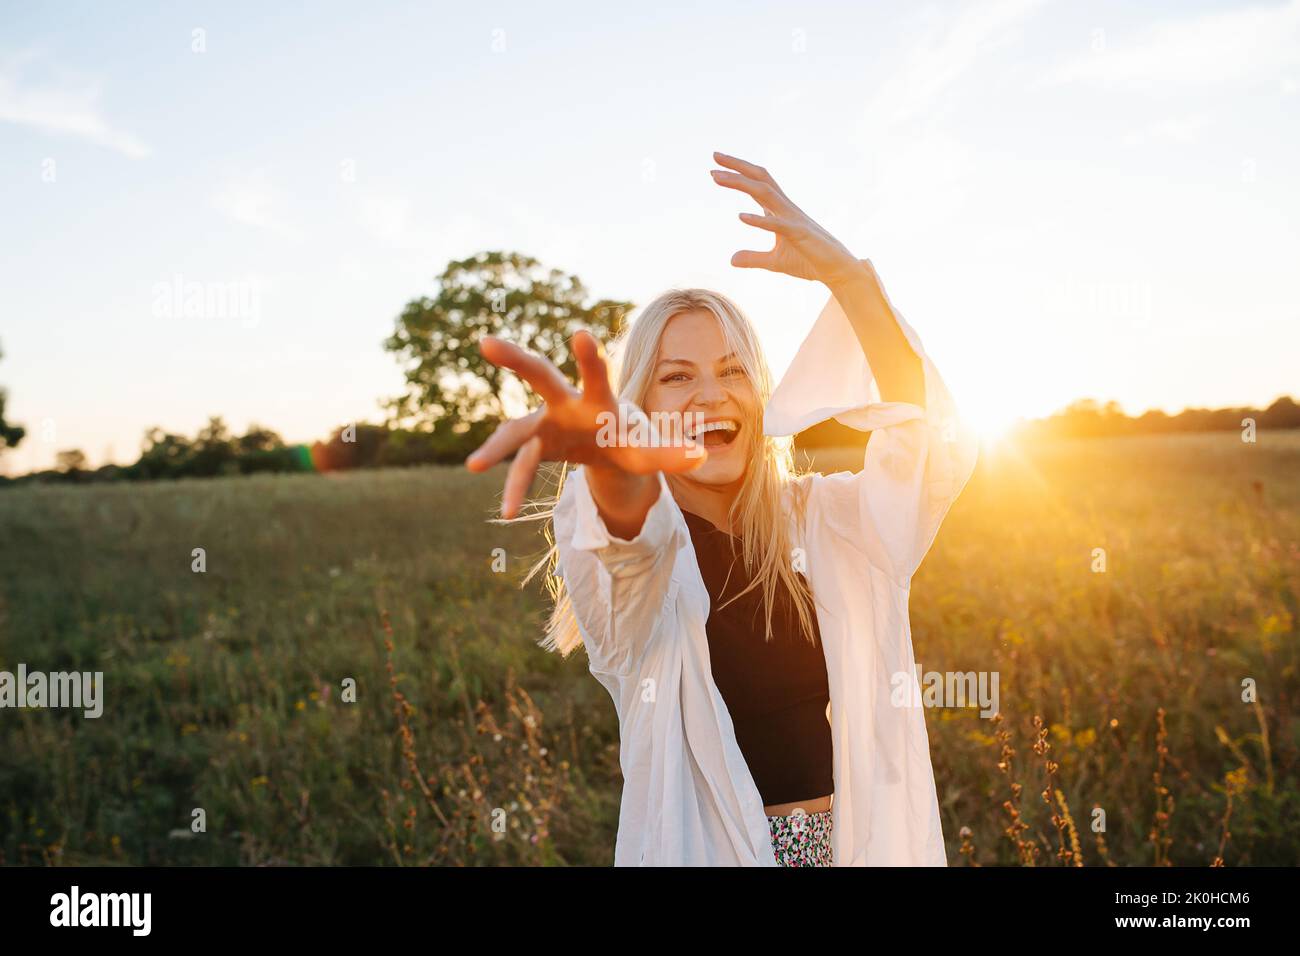 Overjoyed young blond woman standing amidst wheat field. Reaching with her hand. Against setting sun, lit with soft bright orange light. Low angle. Stock Photo